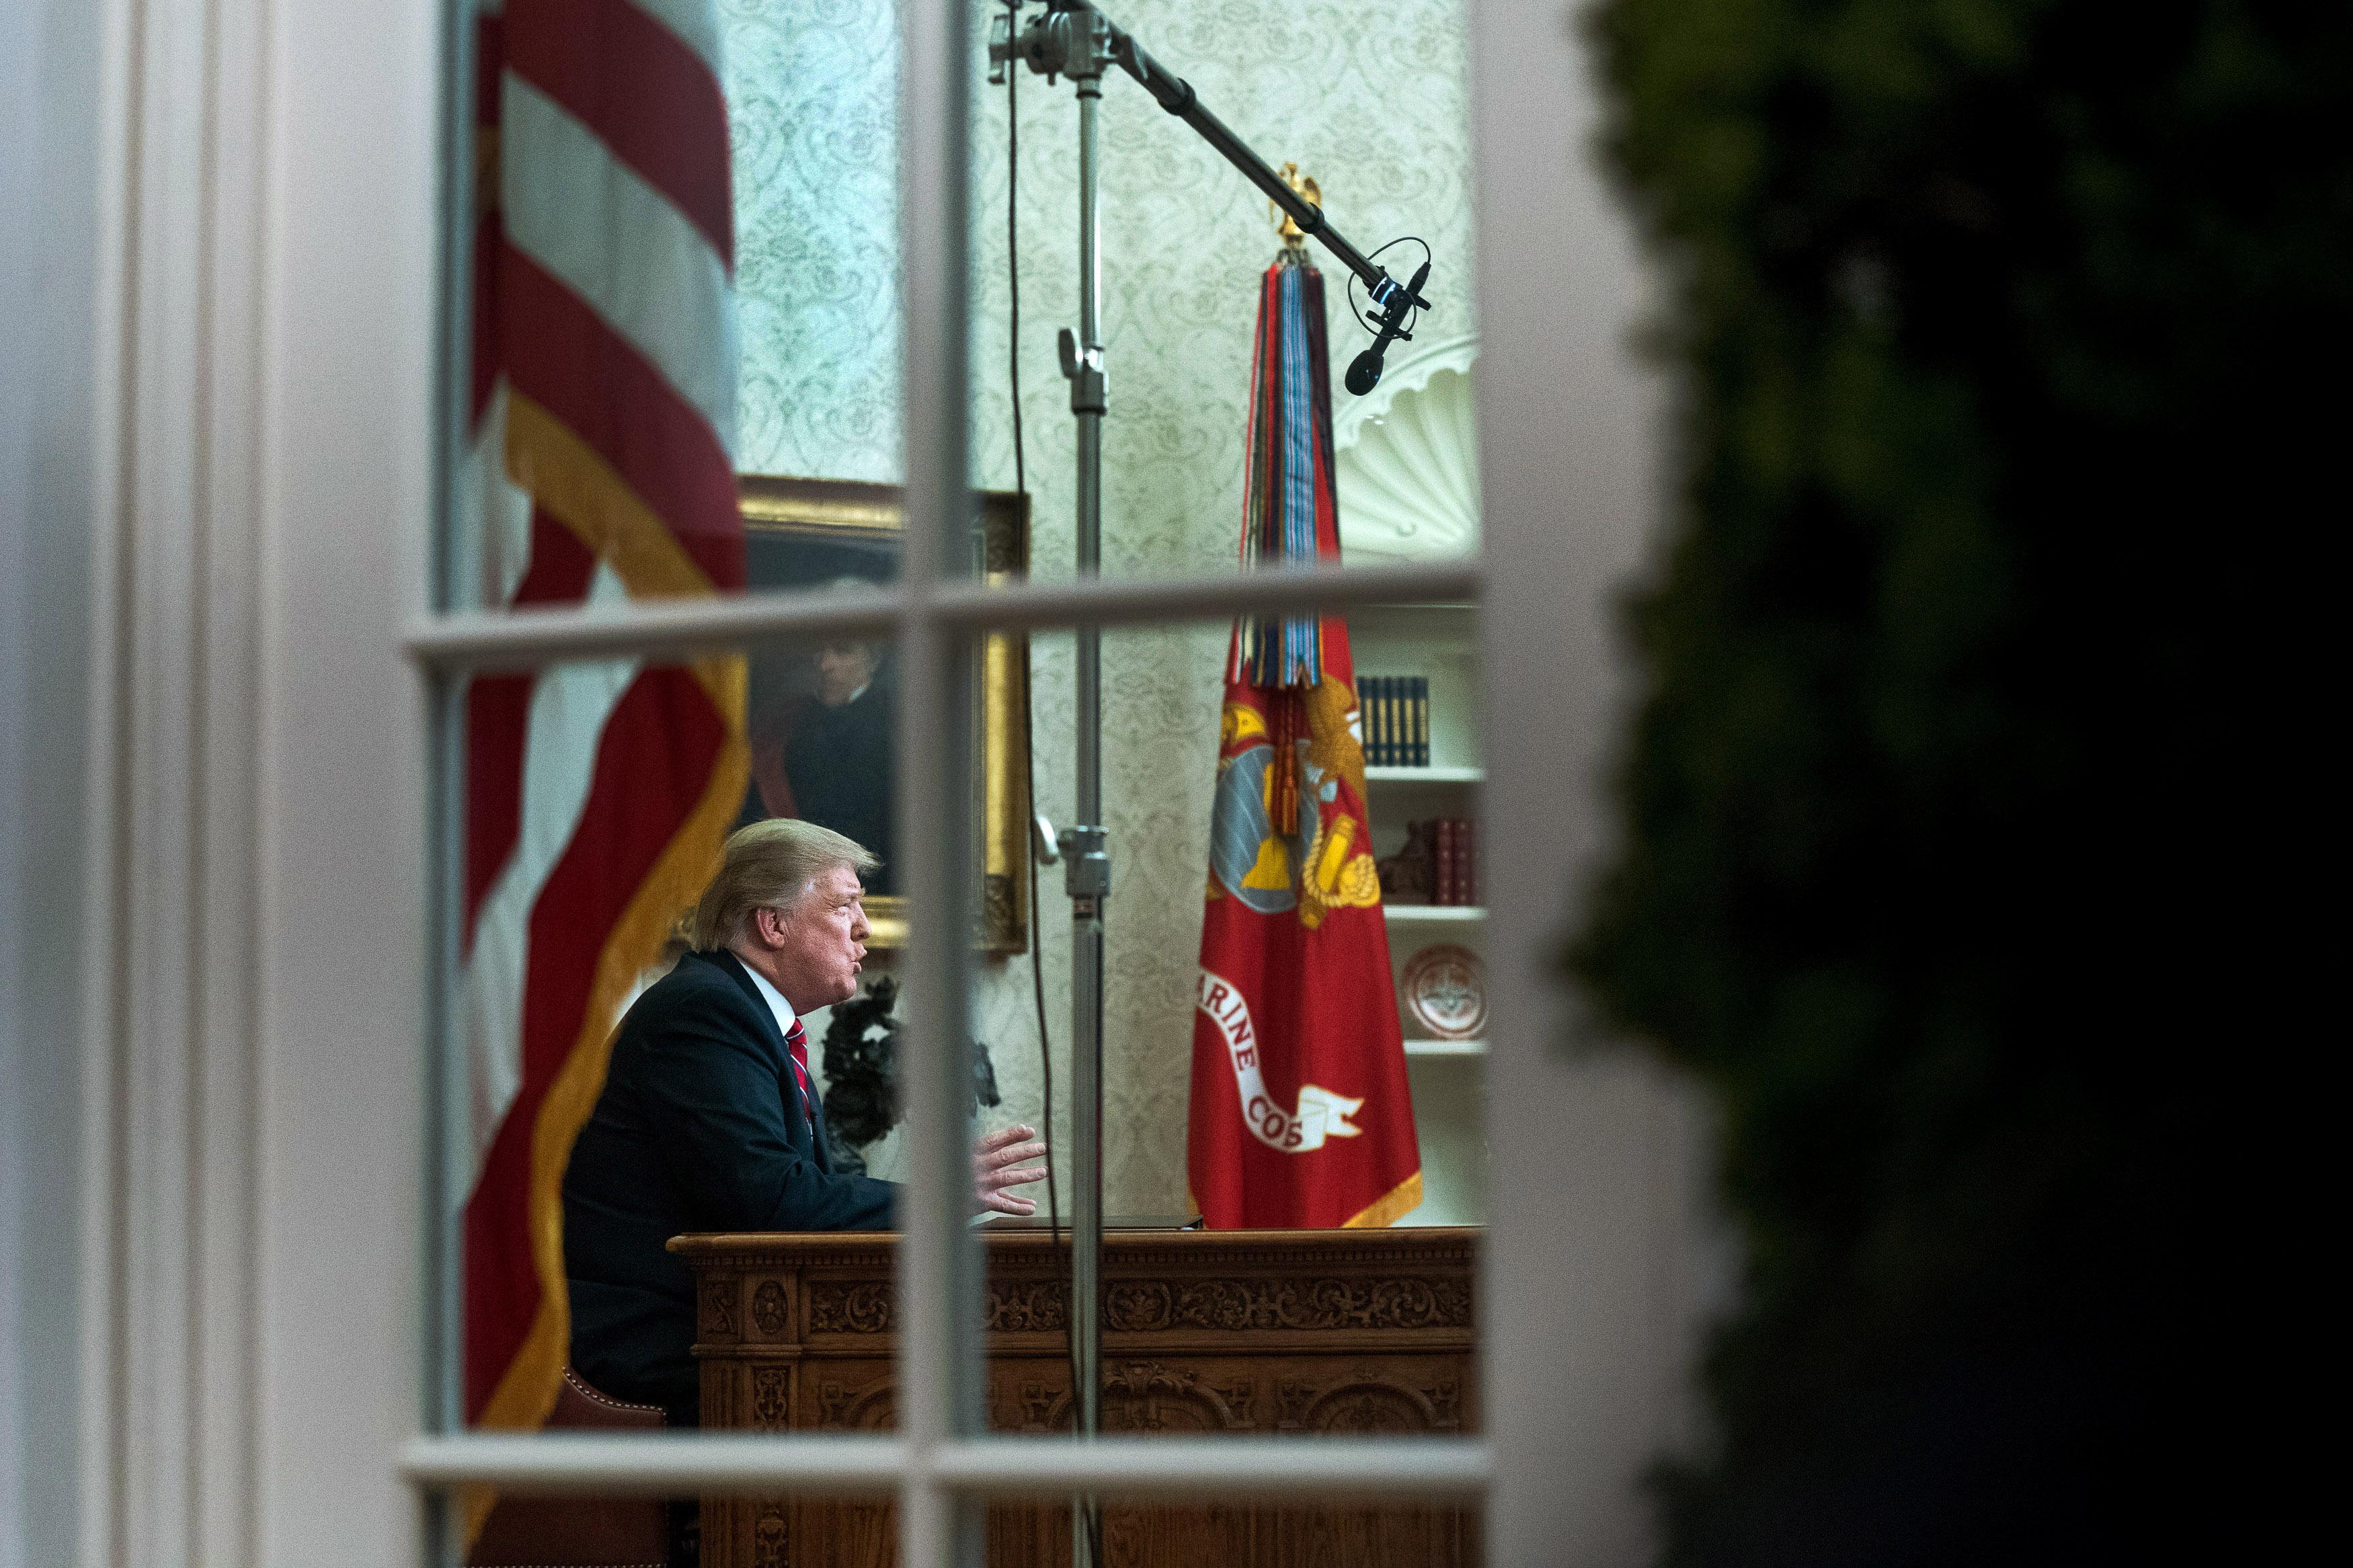 President Donald Trump, seen through the window, speaks to the nation in his first-prime address from the Oval Office of the White House.